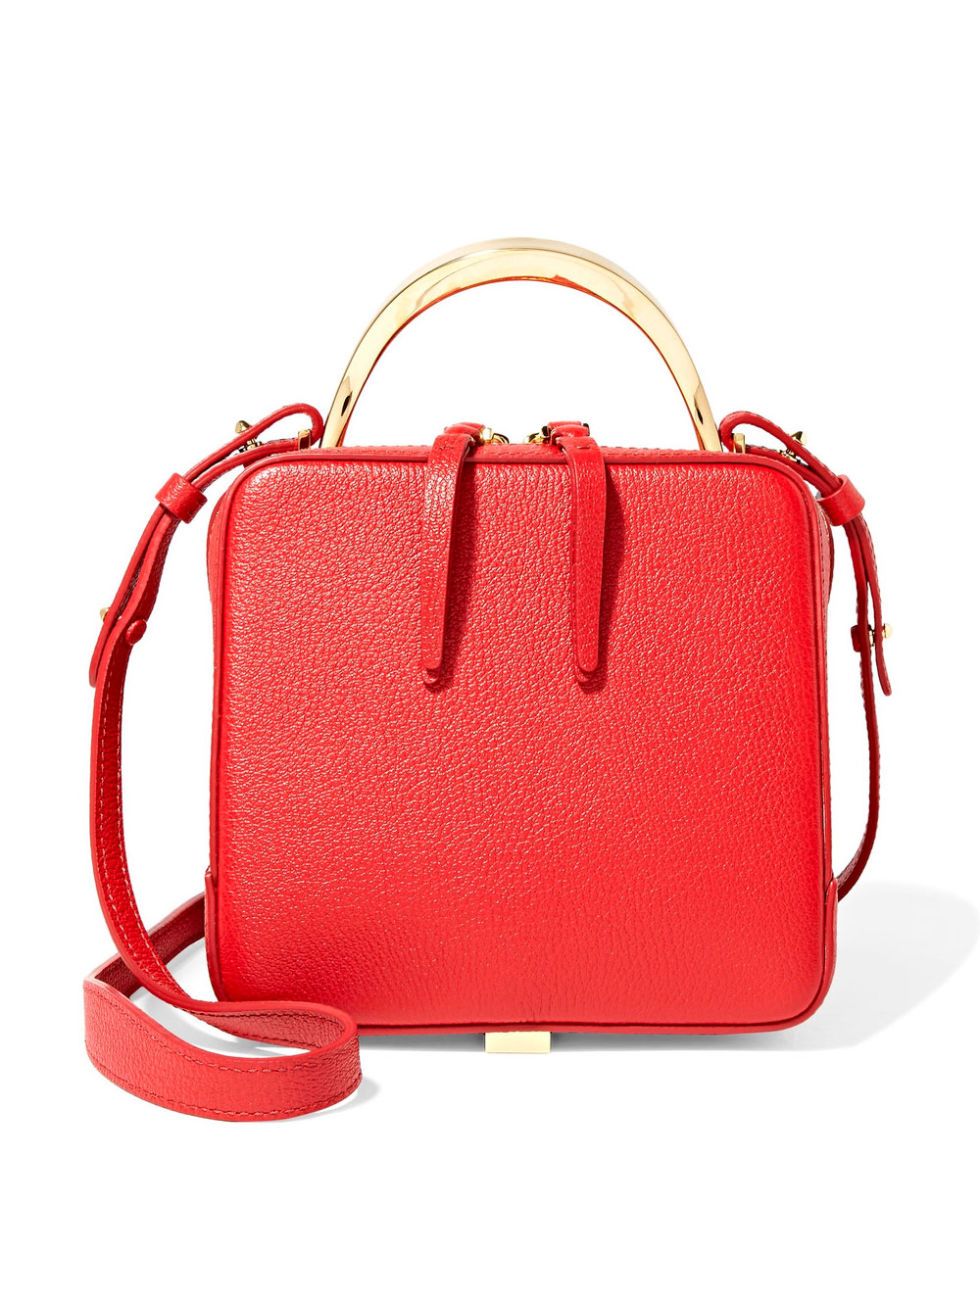 Handbag, Bag, Red, Fashion accessory, Shoulder bag, Leather, Luggage and bags, Material property, Coquelicot, Satchel, 